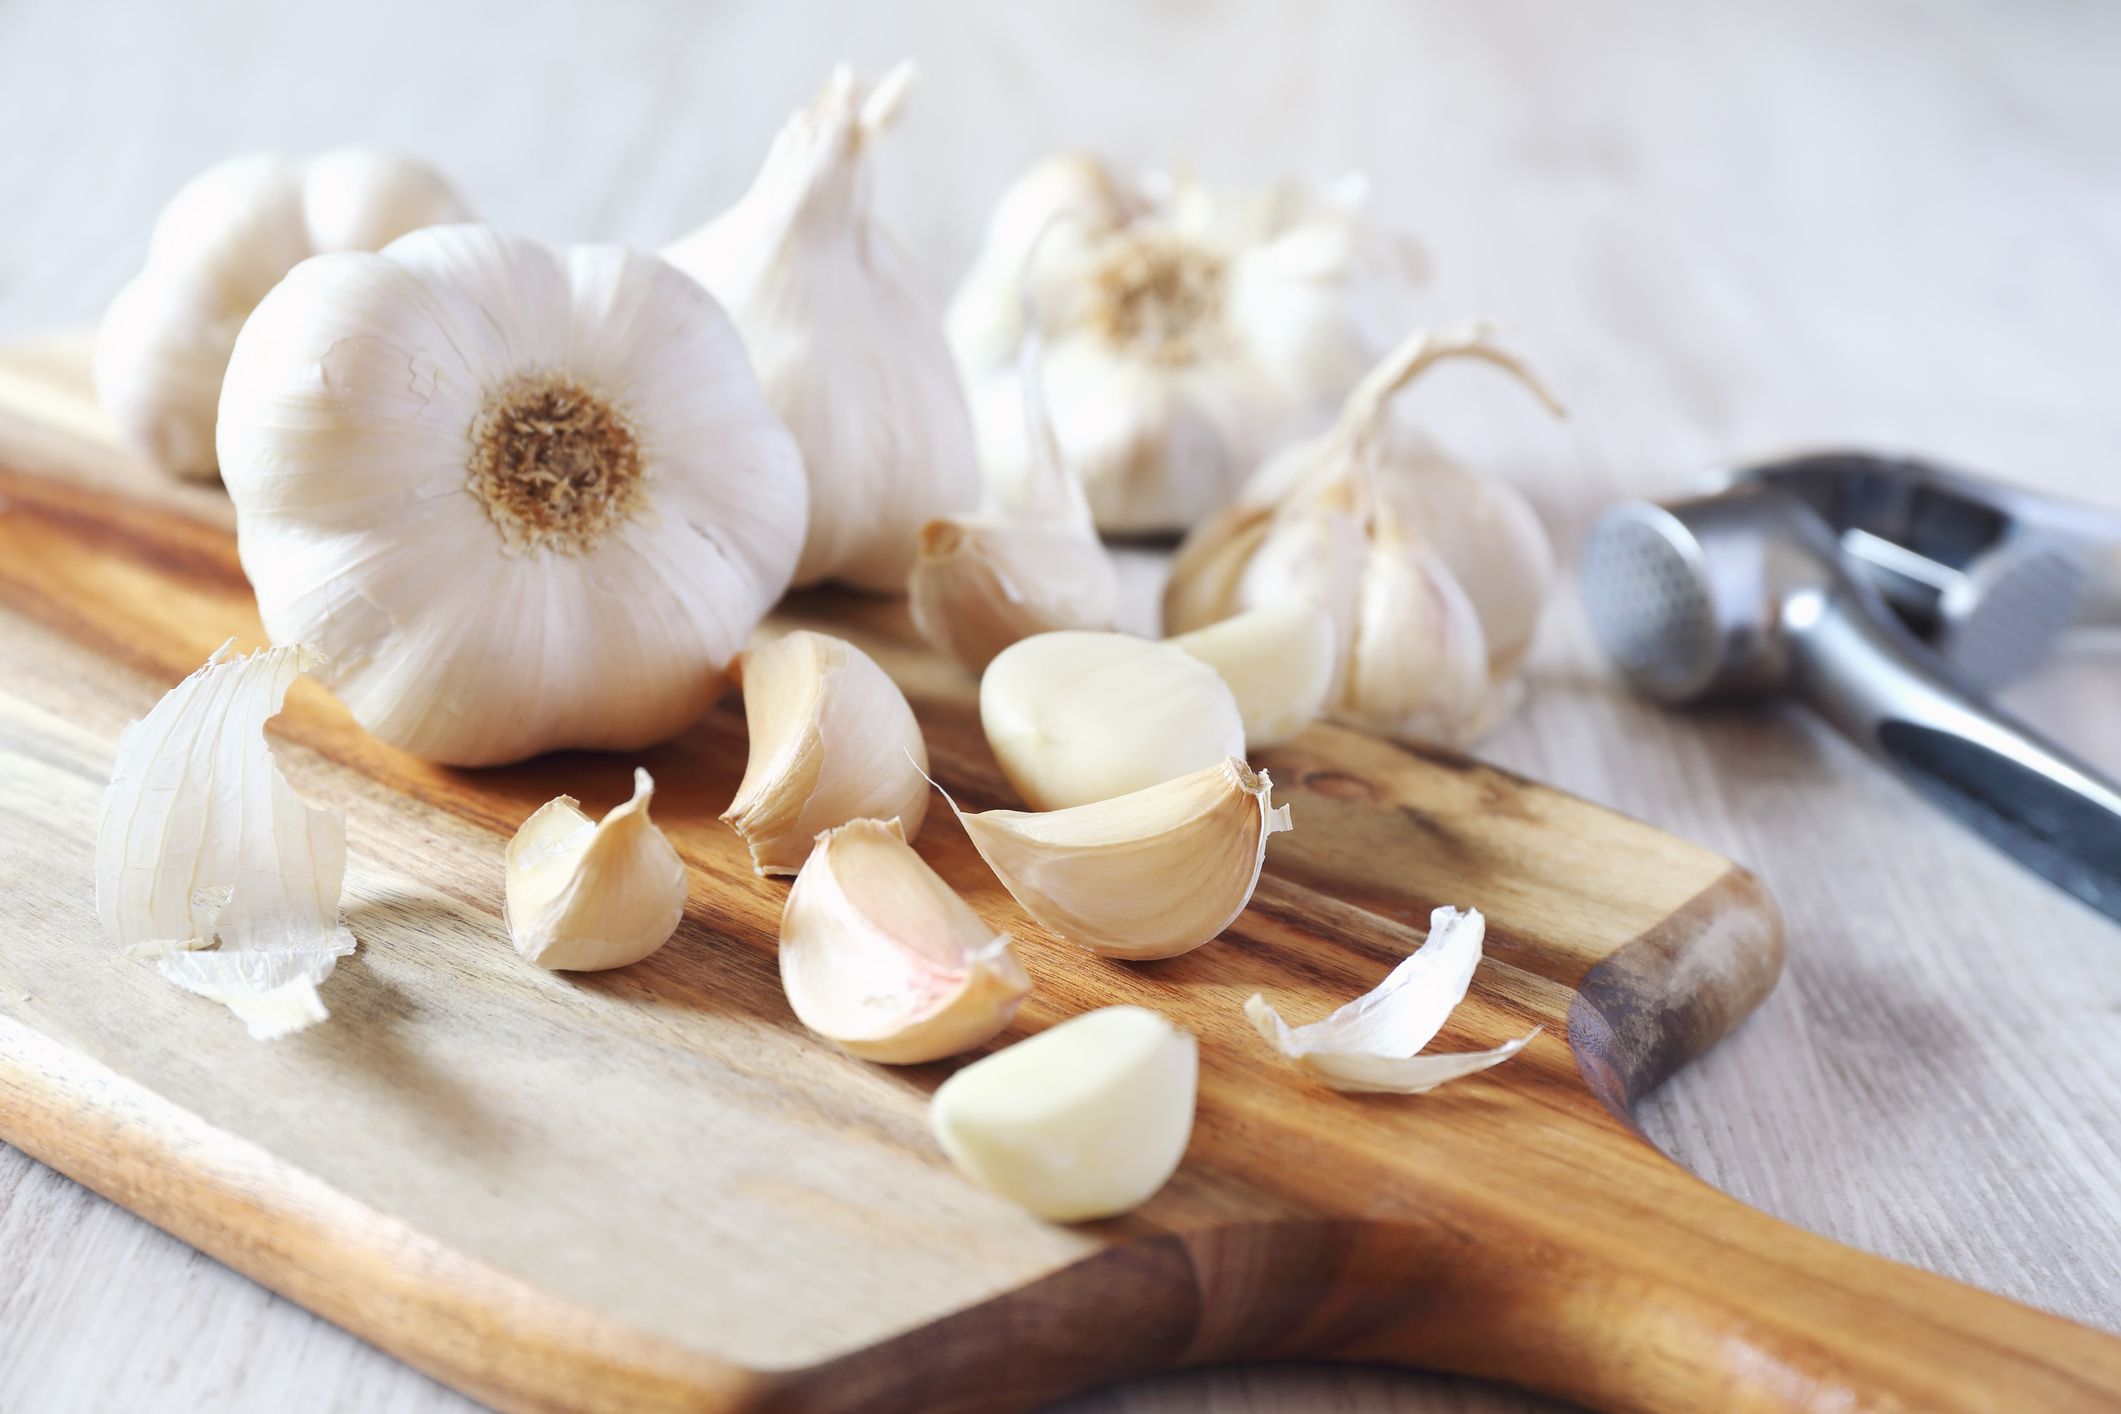 How To Store Unpeeled Garlic